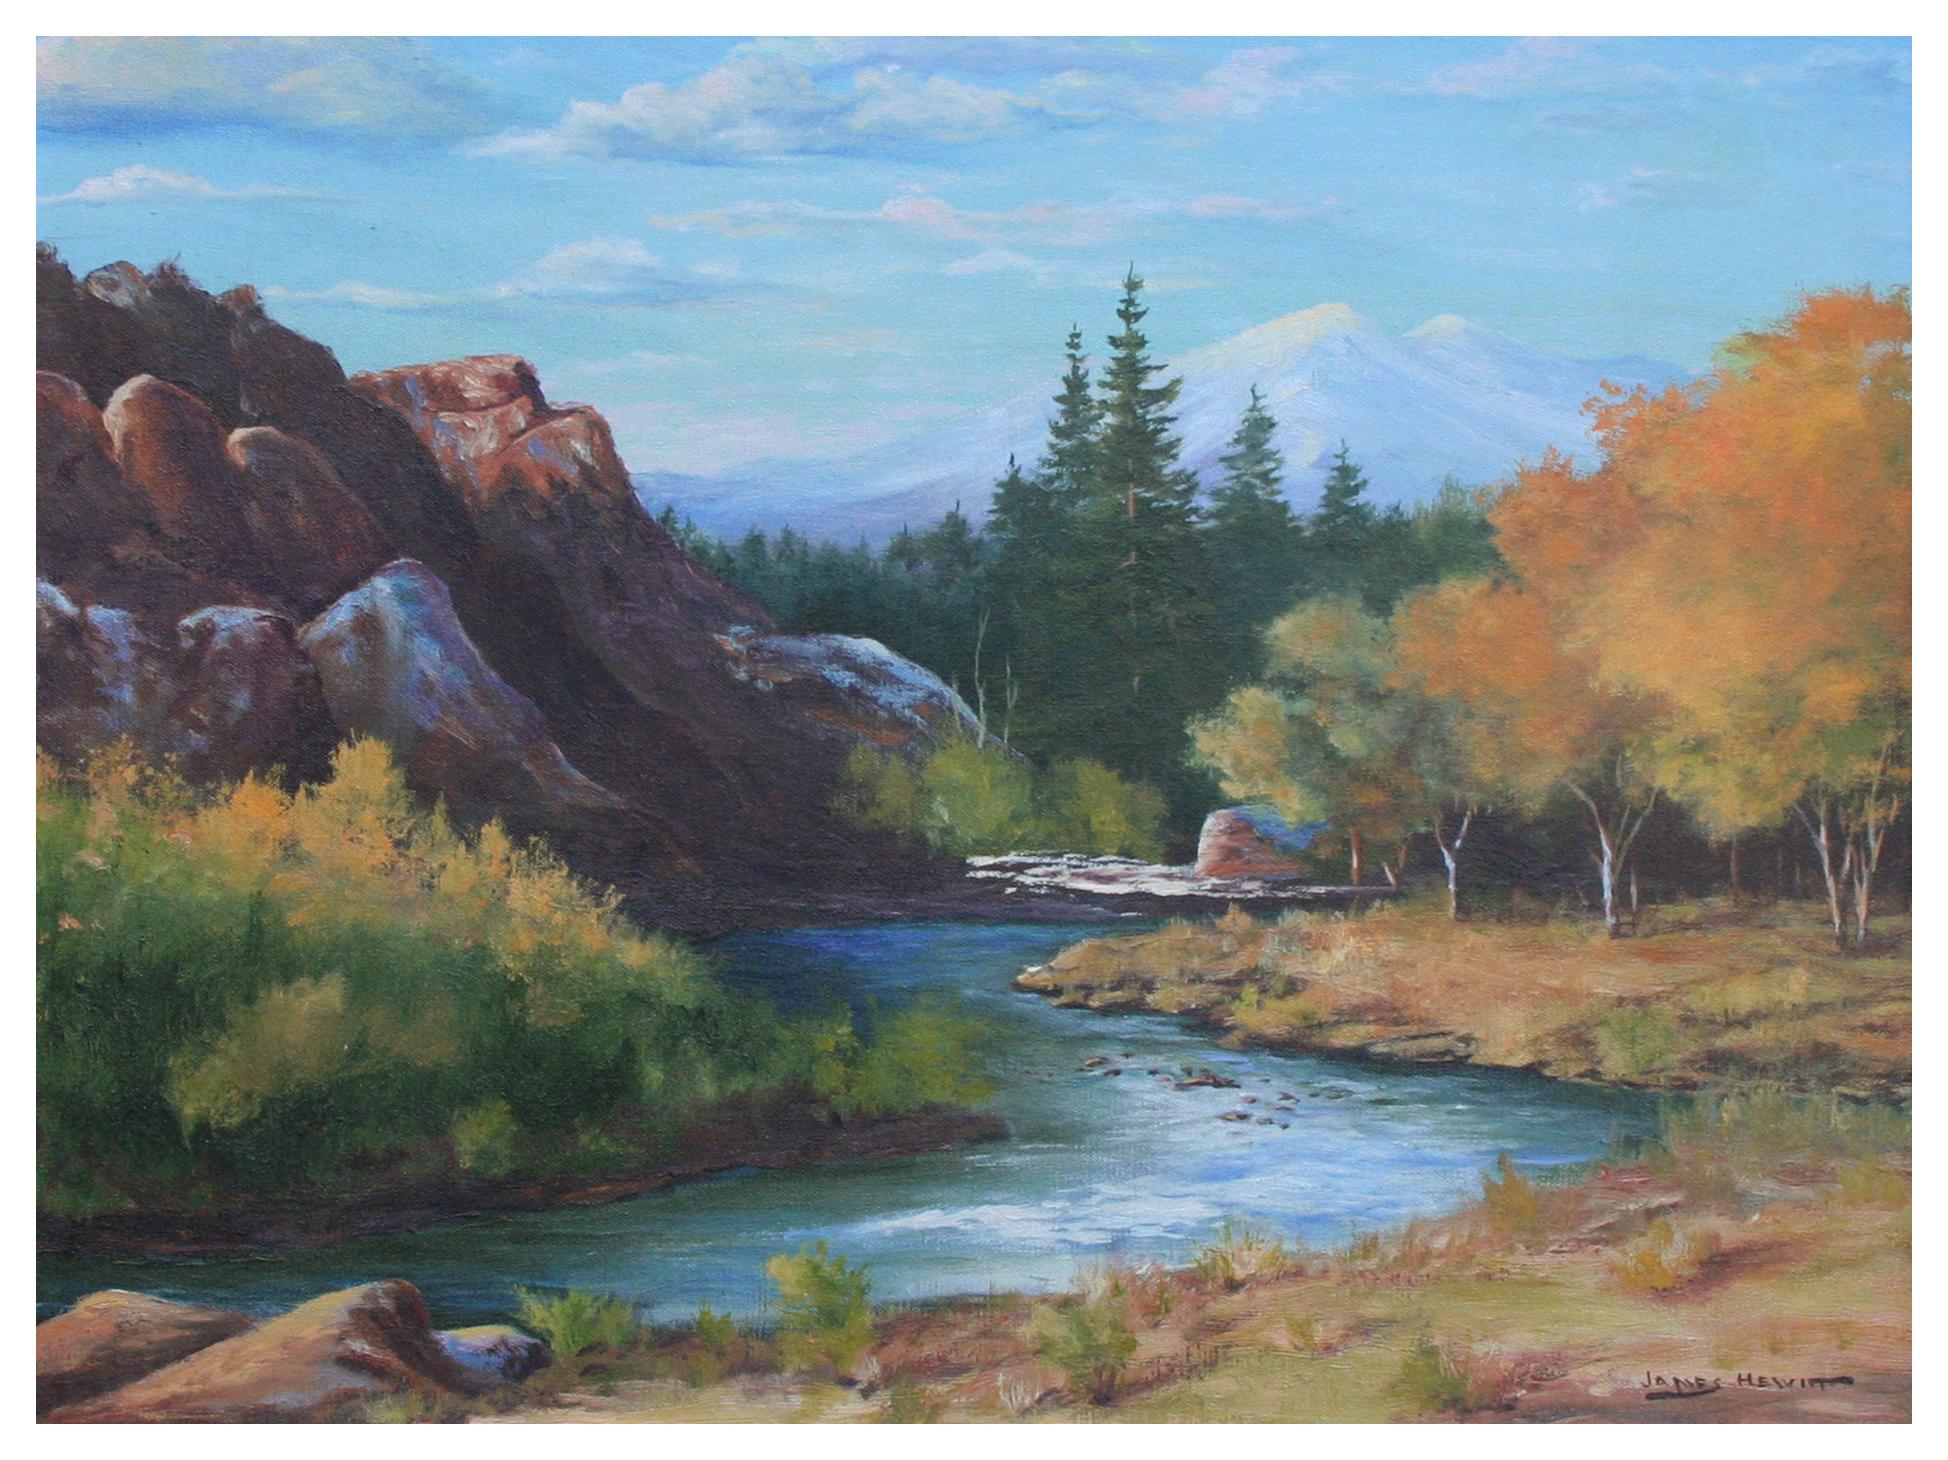 California Mountain River Landscape  - Painting by James Hewitt 